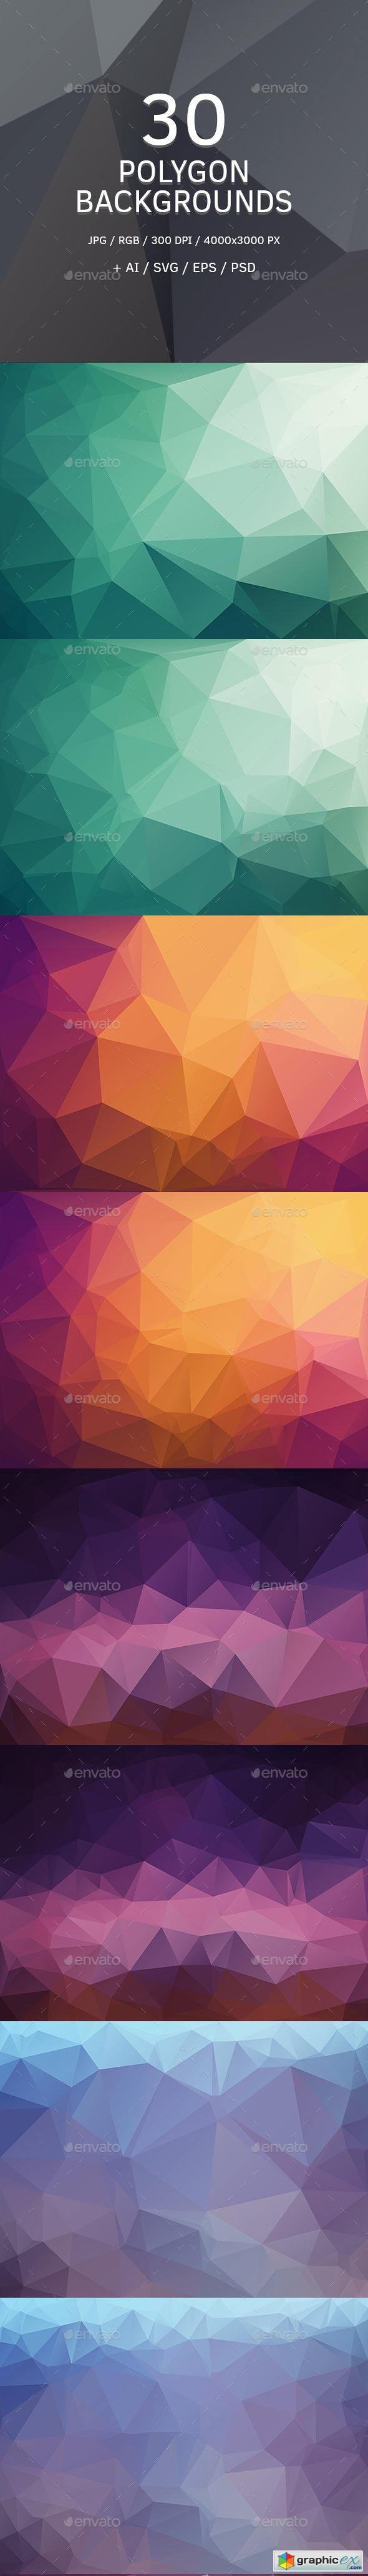 Polygon Backgrounds or Triangle Textures 9164509